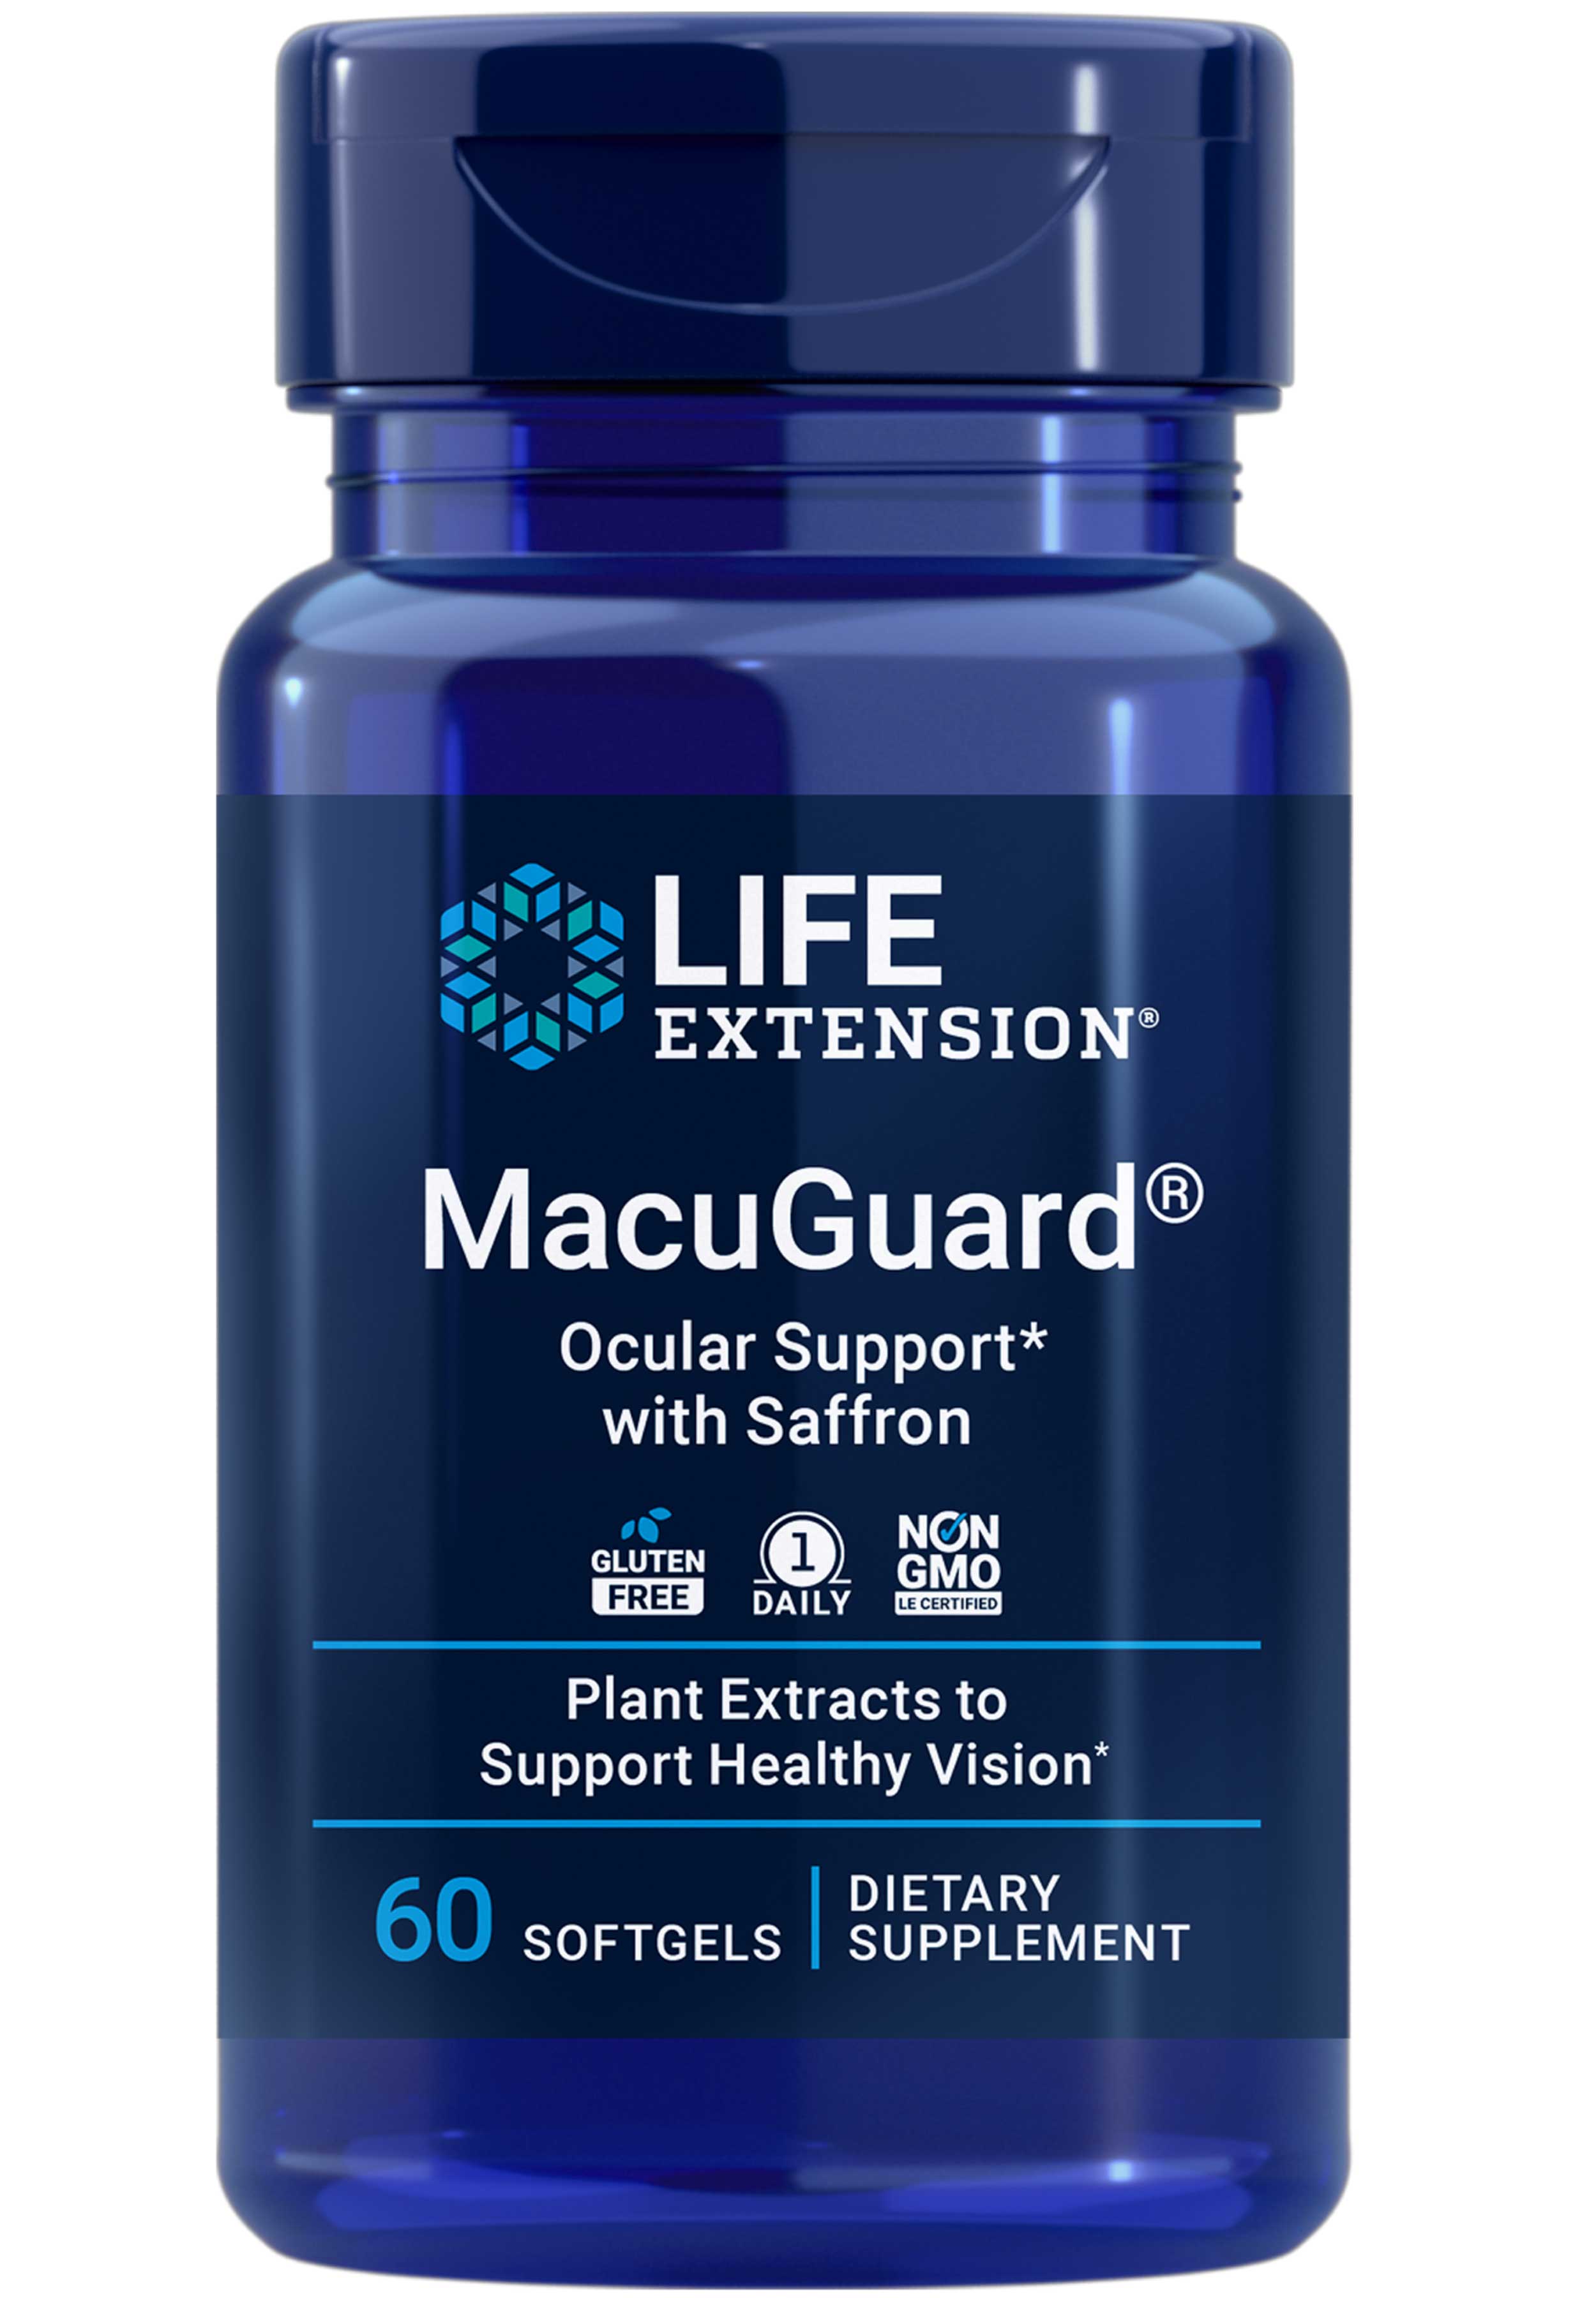 Life Extension MacuGuard® Ocular Support with Saffron